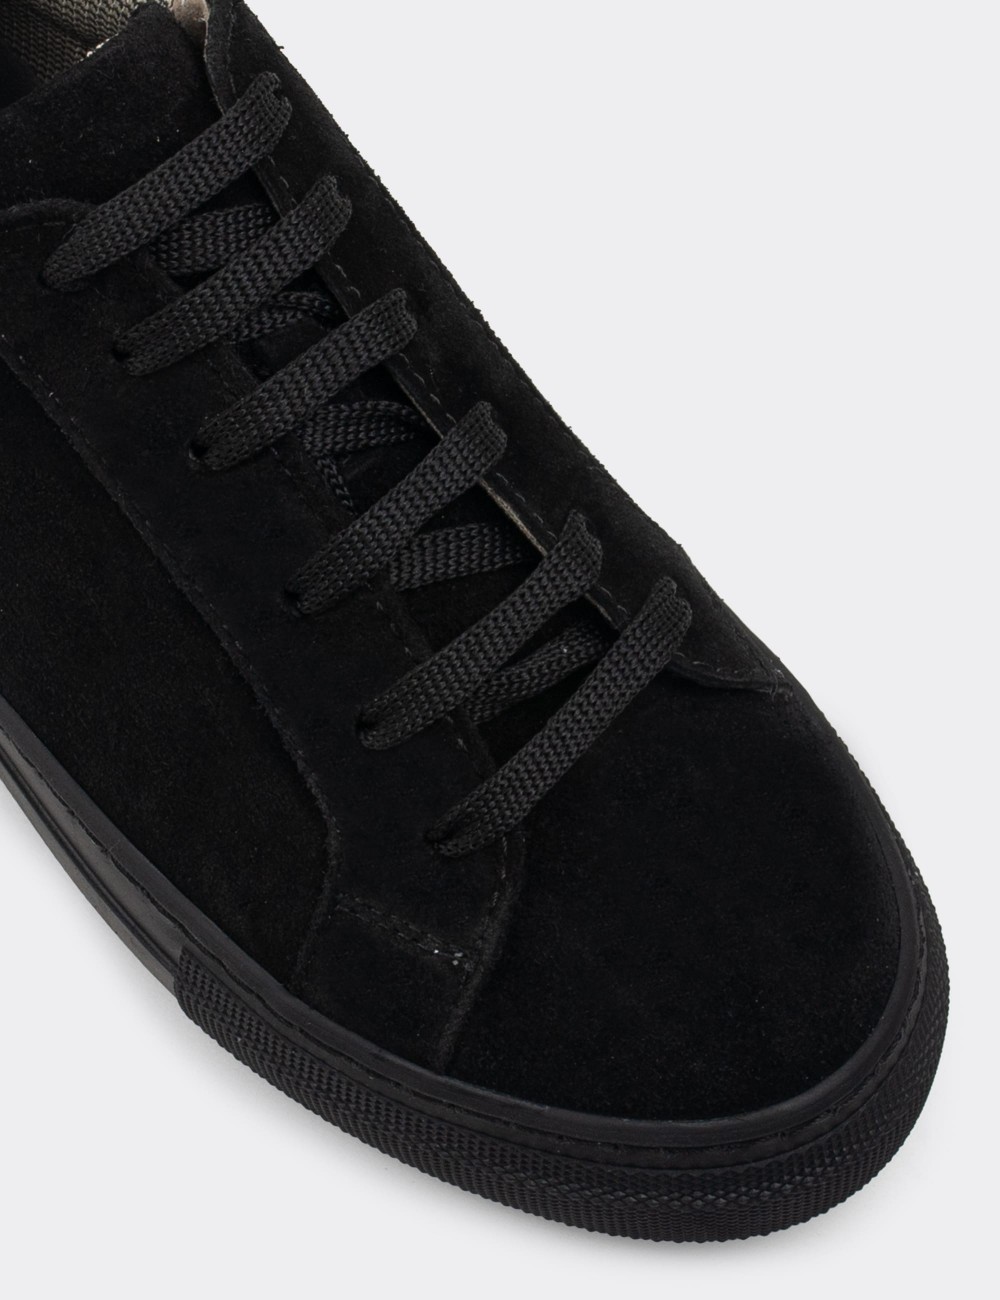 Black Suede Leather Sneakers - Z1681ZSYHC03